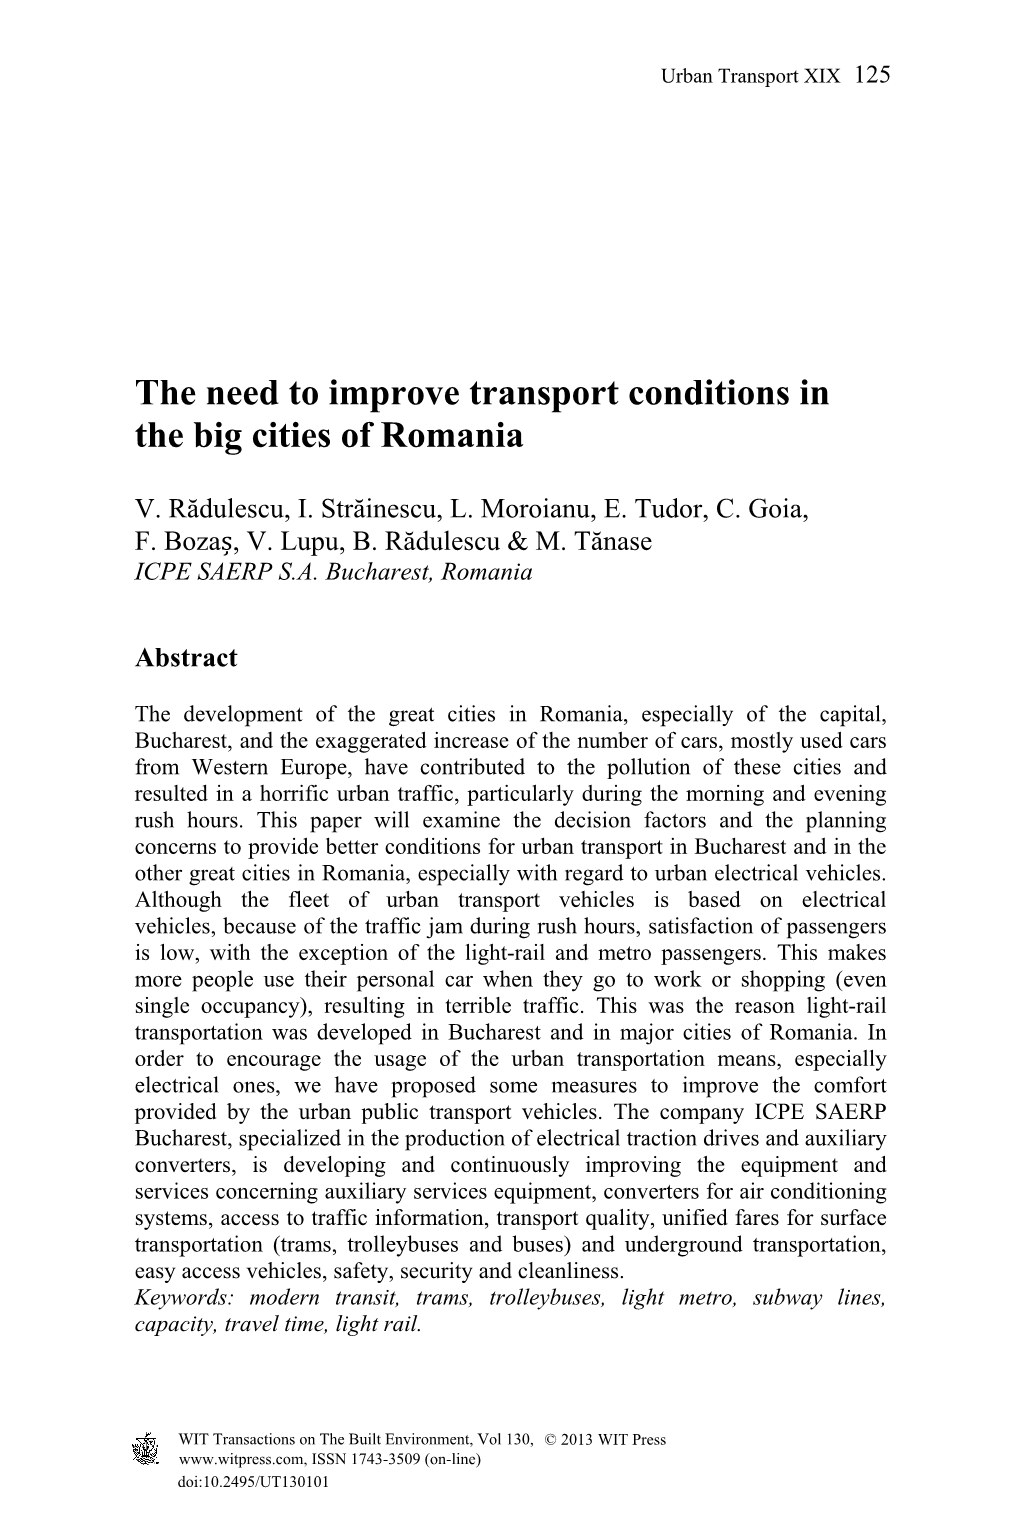 The Need to Improve Transport Conditions in the Big Cities of Romania